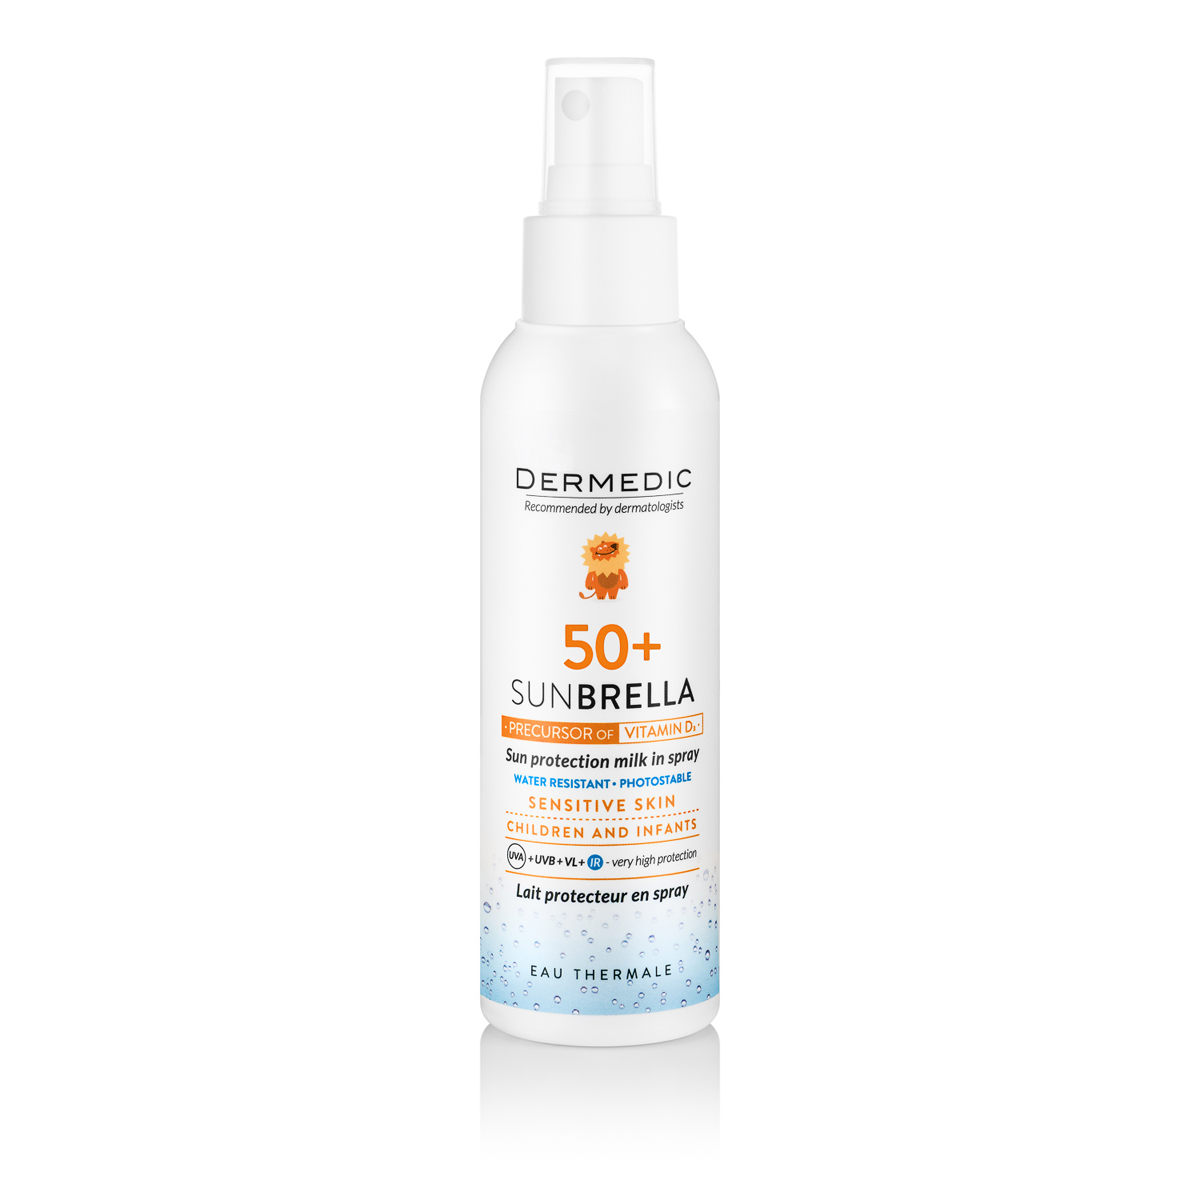 Sun protection milk in spray SPF 50+ for children over 6 months of age